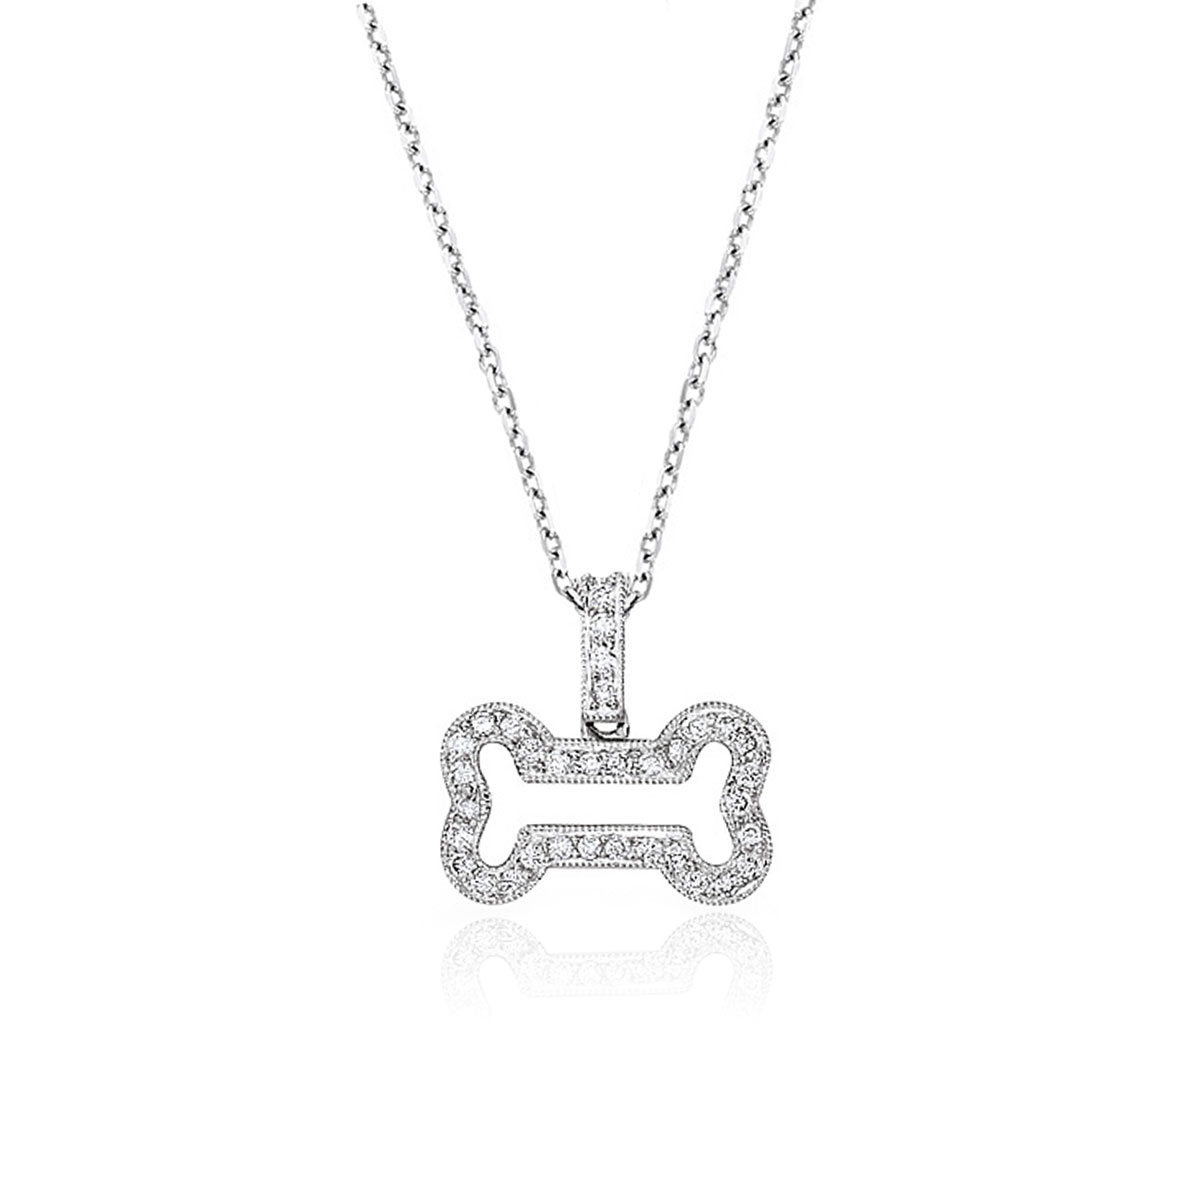 Carbon & Hyde 14K White Gold Diamond Dog Tag Necklace